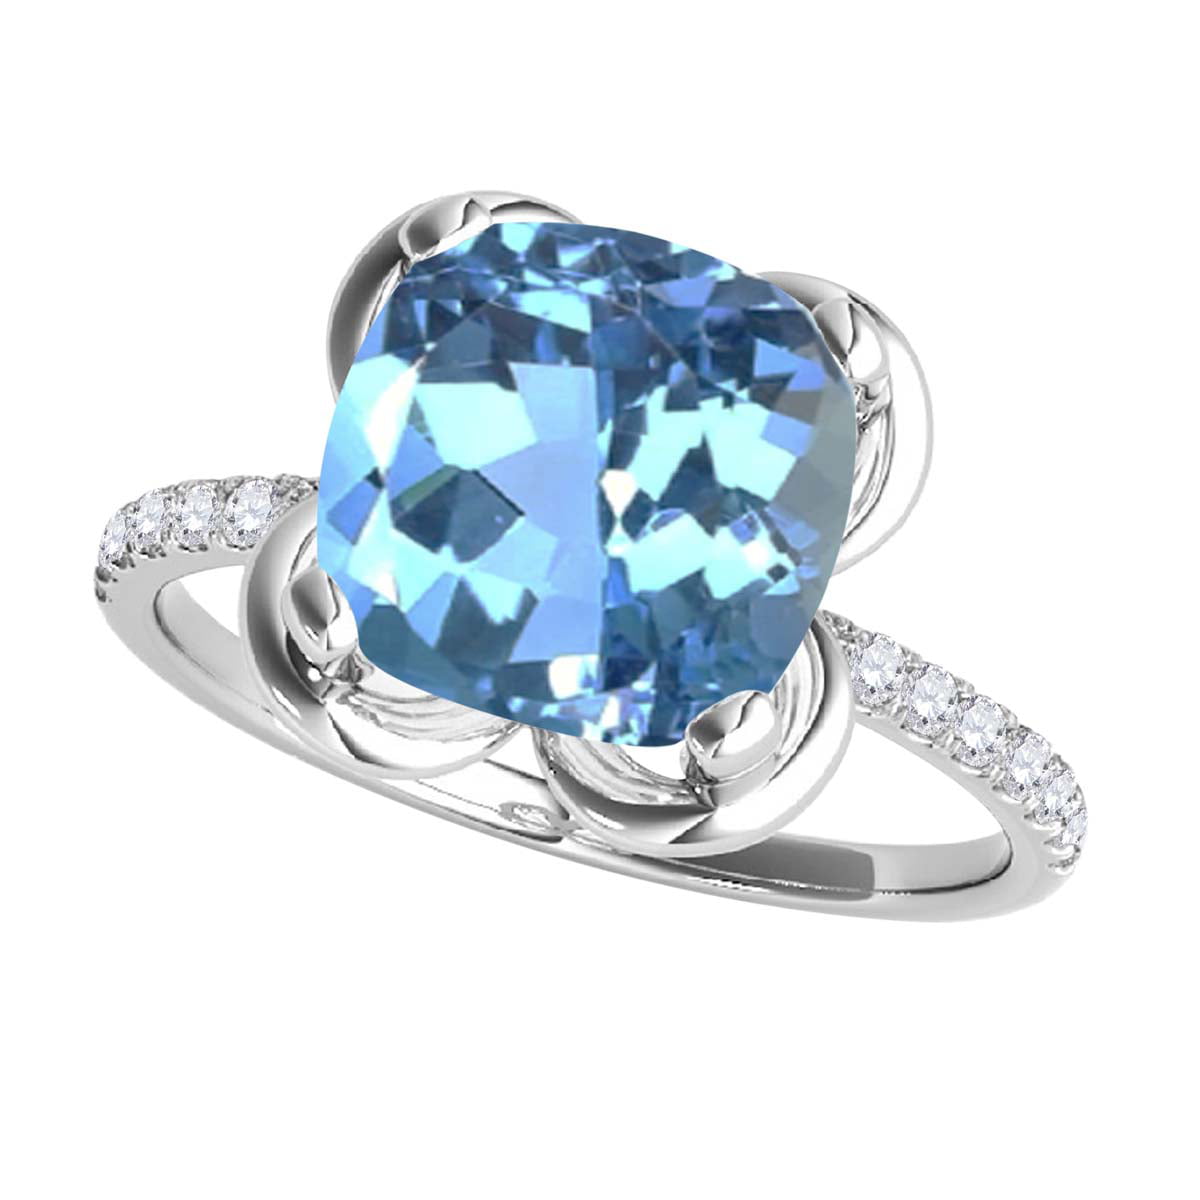 Buy 10K Yellow Gold 8X6 MM Oval Blue Topaz & Round White Diamond Bridal  Engagement Ring Online at Dazzling Rock